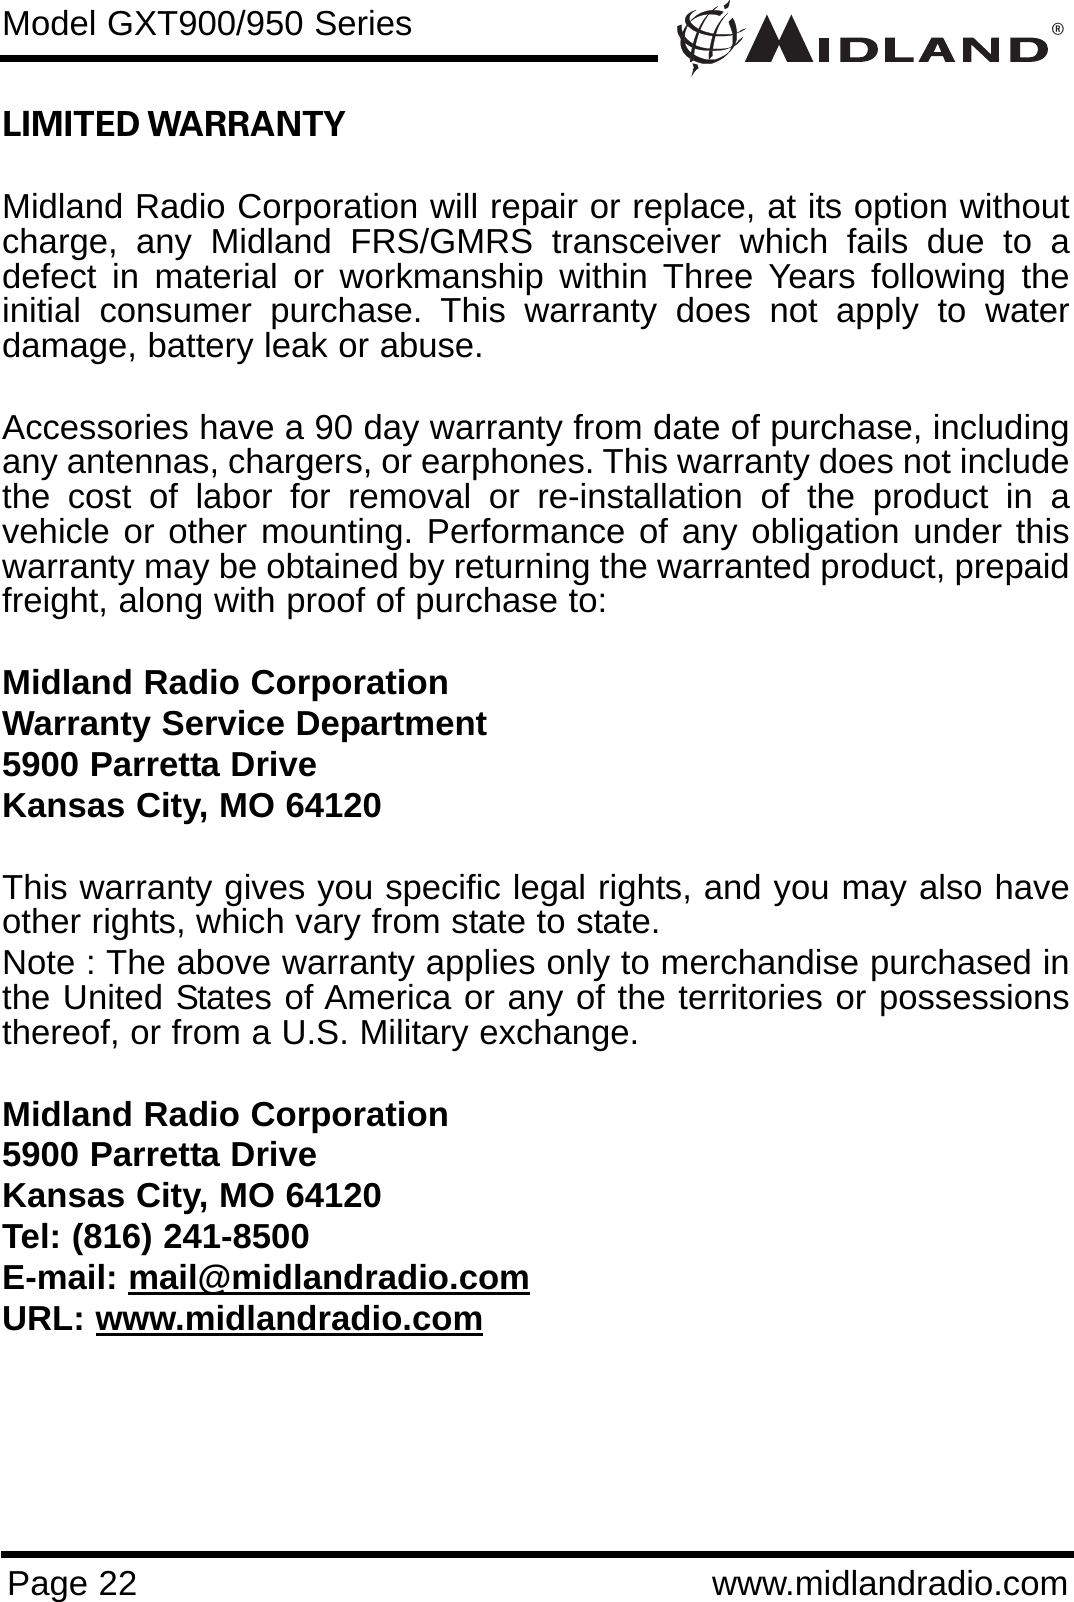 ®Page 22 www.midlandradio.comLIMITED WARRANTY Midland Radio Corporation will repair or replace, at its option withoutcharge, any Midland FRS/GMRS transceiver which fails due to adefect in material or workmanship within Three Years following theinitial consumer purchase. This warranty does not apply to waterdamage, battery leak or abuse.Accessories have a 90 day warranty from date of purchase, includingany antennas, chargers, or earphones. This warranty does not includethe cost of labor for removal or re-installation of the product in avehicle or other mounting. Performance of any obligation under thiswarranty may be obtained by returning the warranted product, prepaidfreight, along with proof of purchase to:Midland Radio CorporationWarranty Service Department5900 Parretta DriveKansas City, MO 64120This warranty gives you specific legal rights, and you may also haveother rights, which vary from state to state.Note : The above warranty applies only to merchandise purchased inthe United States of America or any of the territories or possessionsthereof, or from a U.S. Military exchange.Midland Radio Corporation5900 Parretta DriveKansas City, MO 64120Tel: (816) 241-8500E-mail: mail@midlandradio.comURL: www.midlandradio.comModel GXT900/950 Series